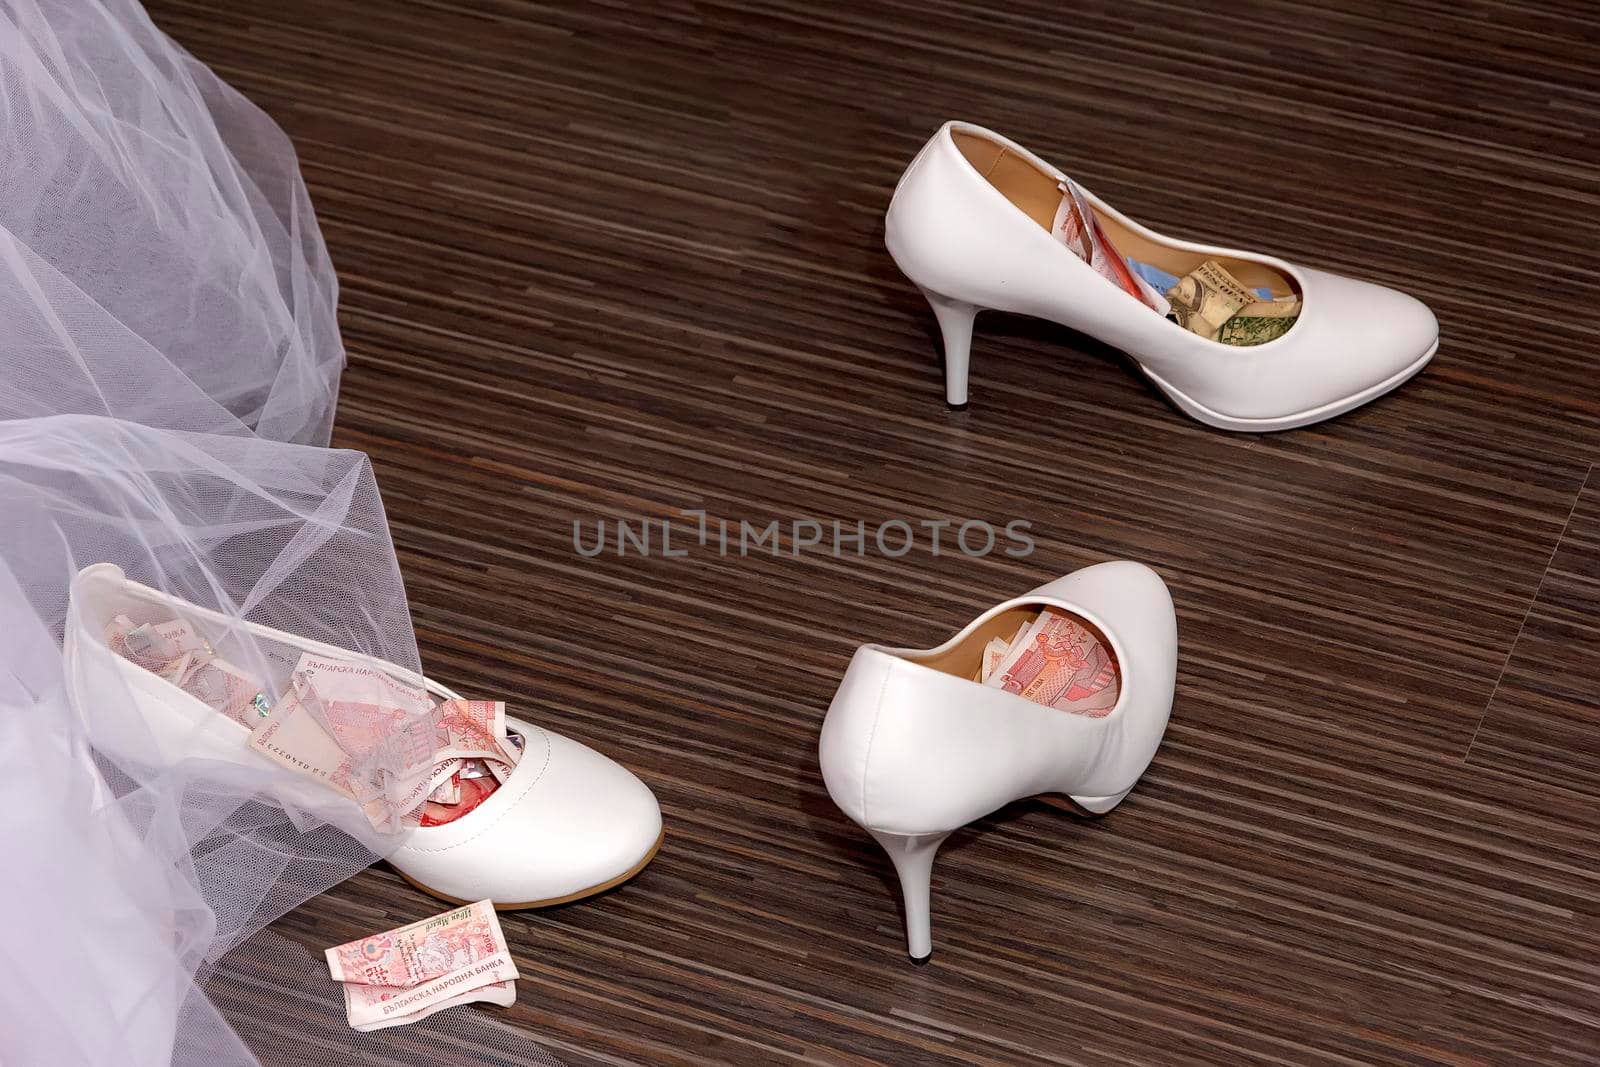 a white wedding shoes full of money and currency. ritual at some weddings-the shoe is filled with money then the bride is given to the groom. by EdVal